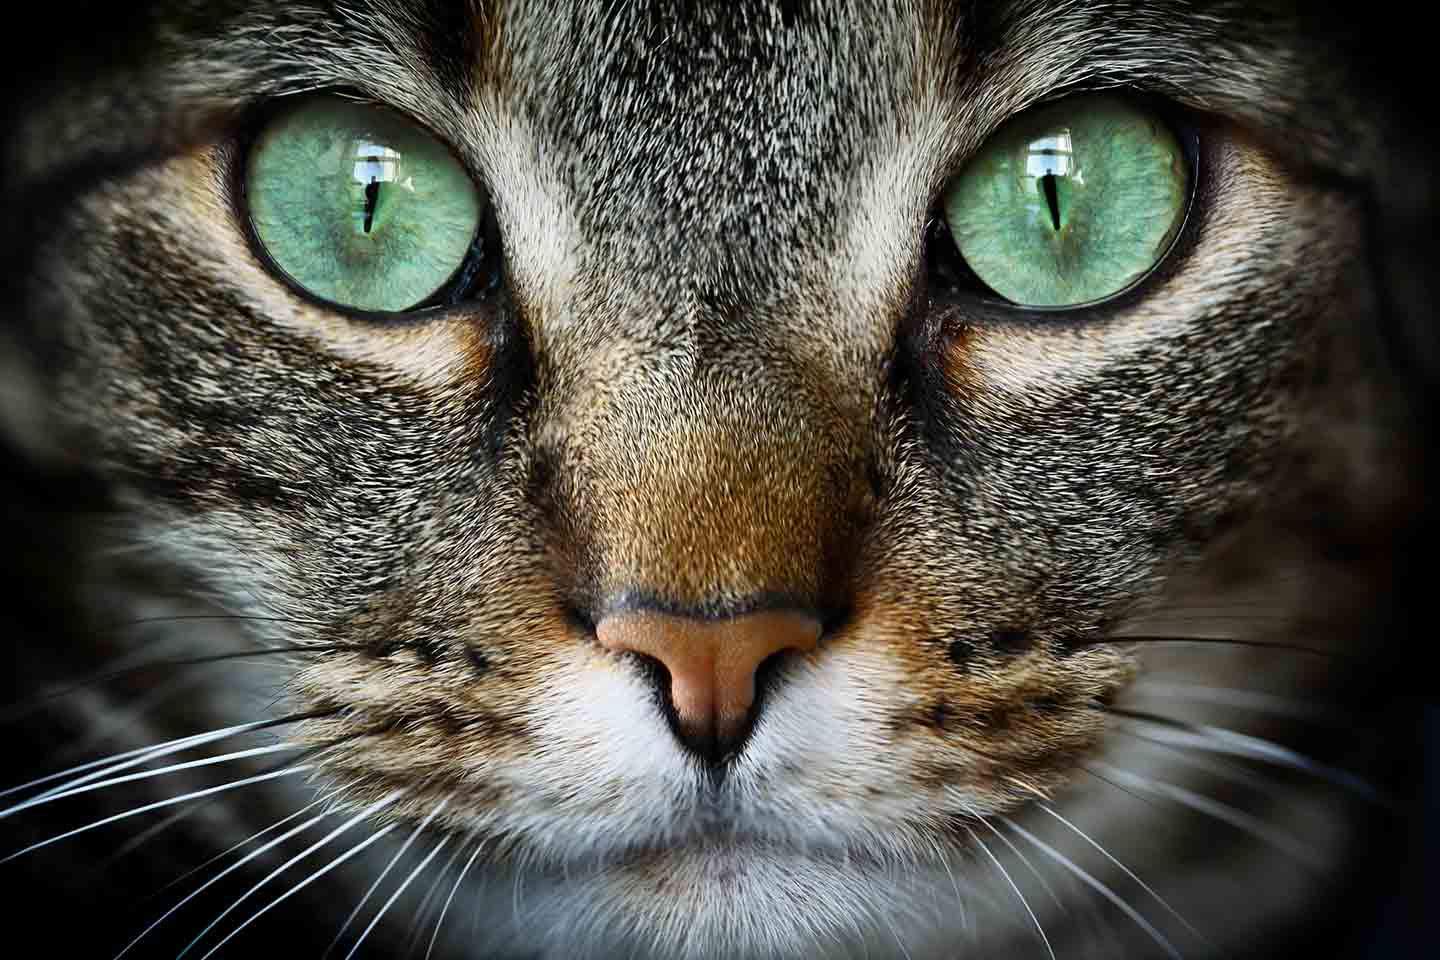 Close-up photo of a cat's face